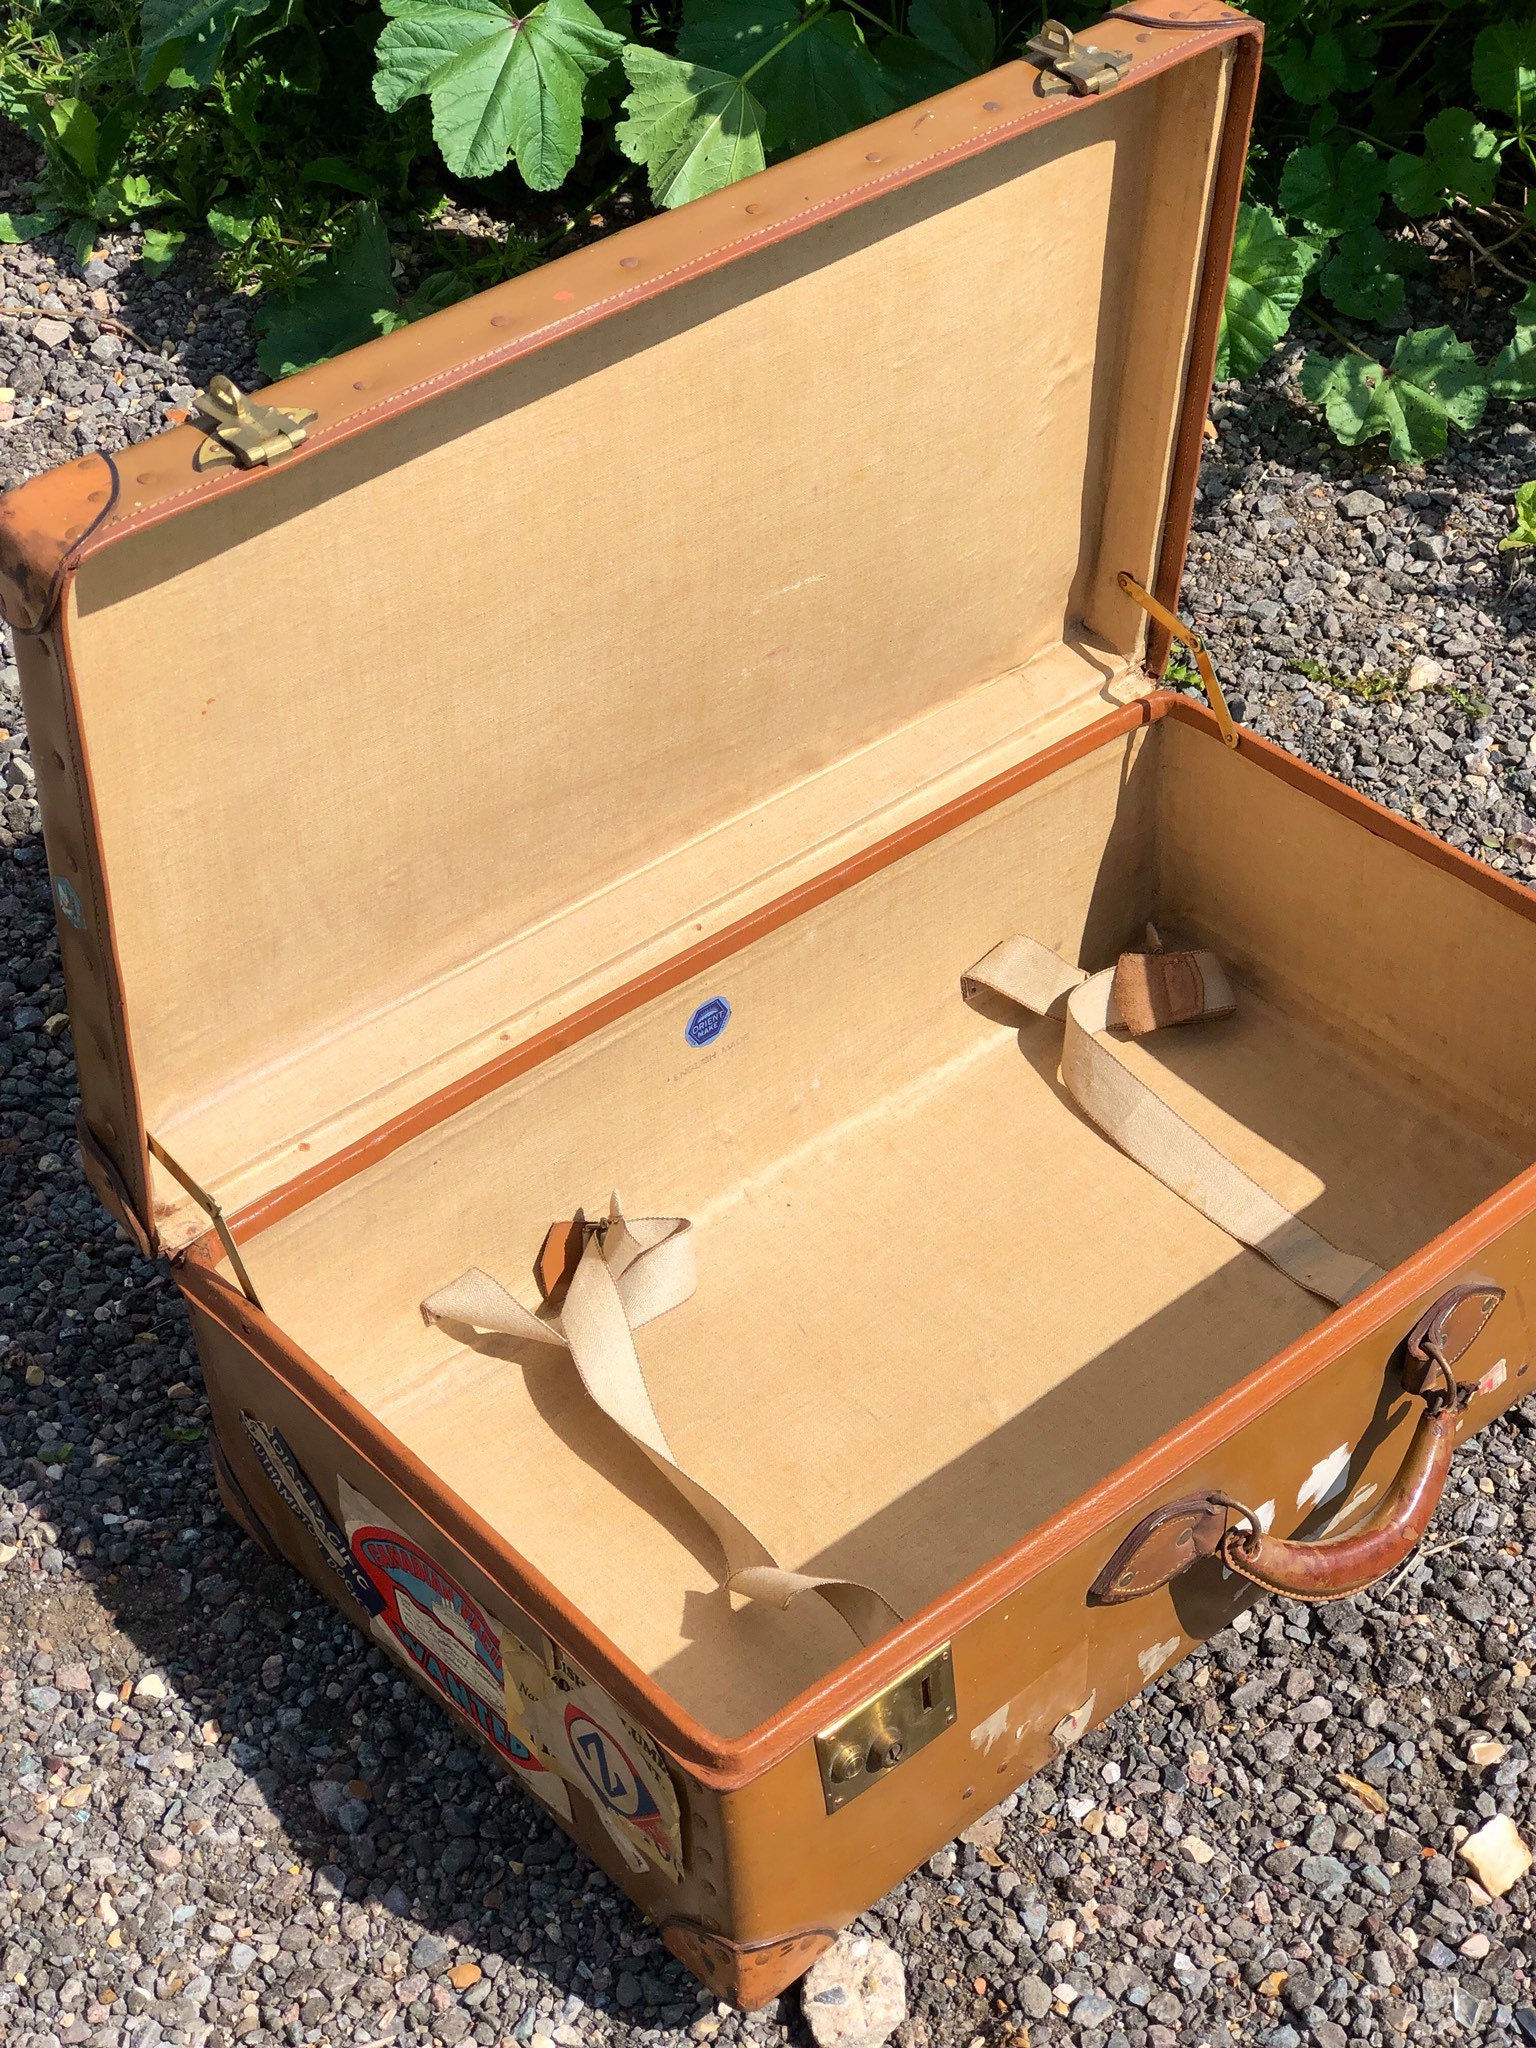 These antique travel trunks let people travel in perfectly